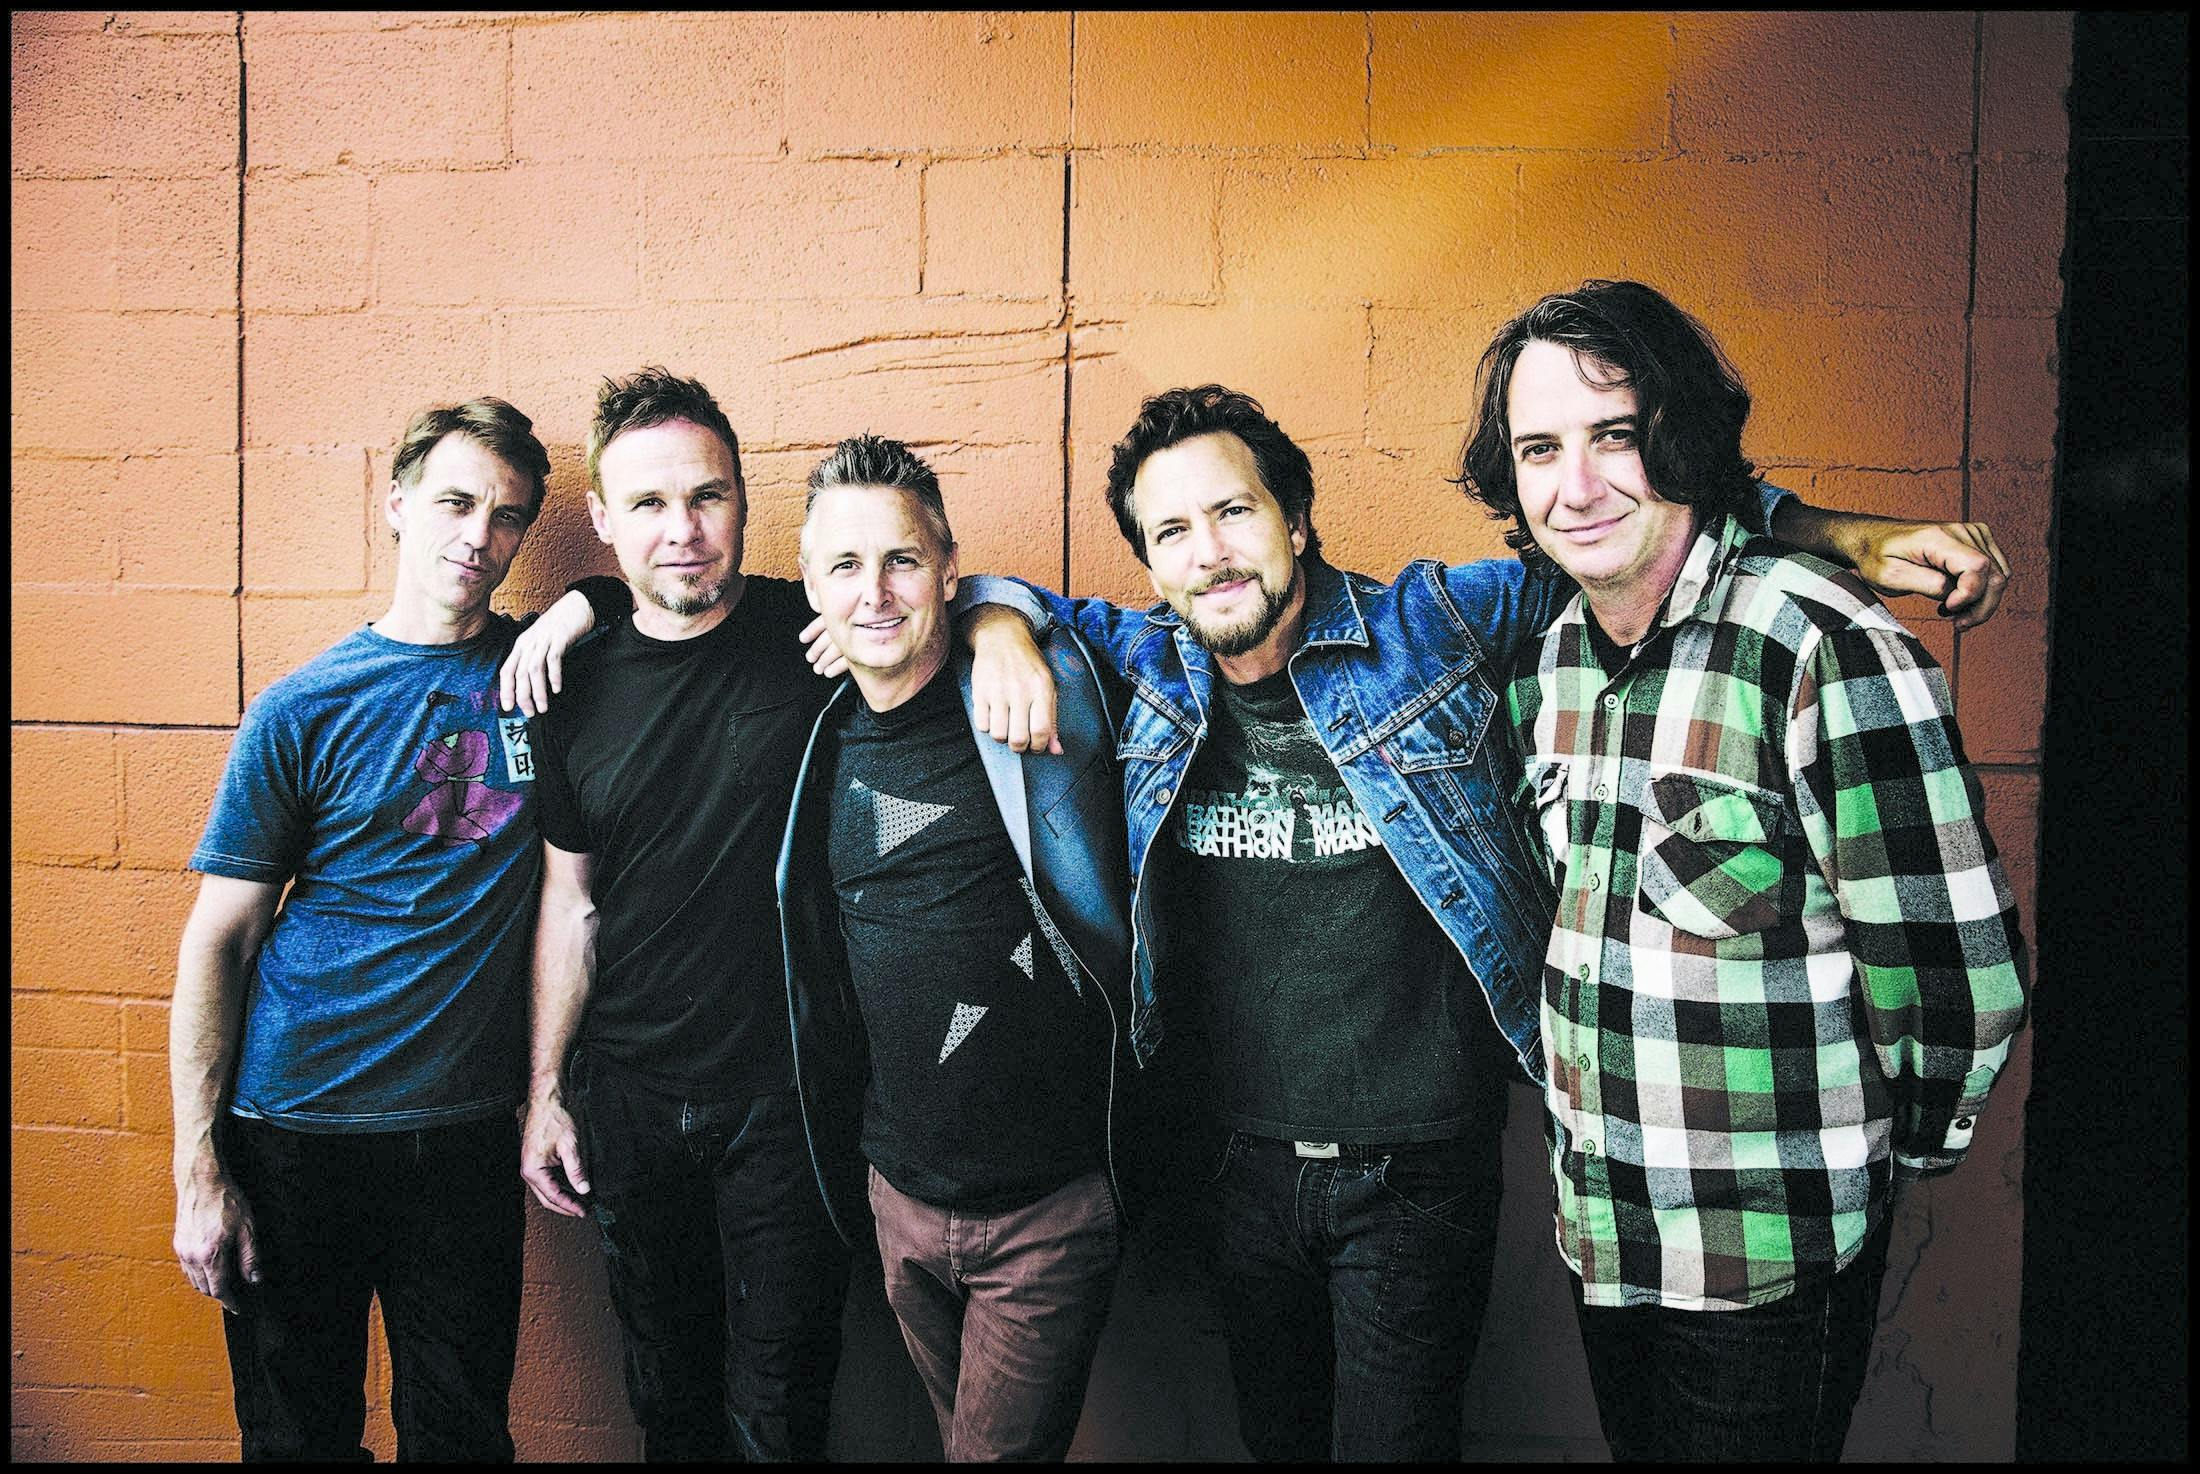 Pearl Jam: "We’ve Got A Bunch Of Songs Ready To Go"